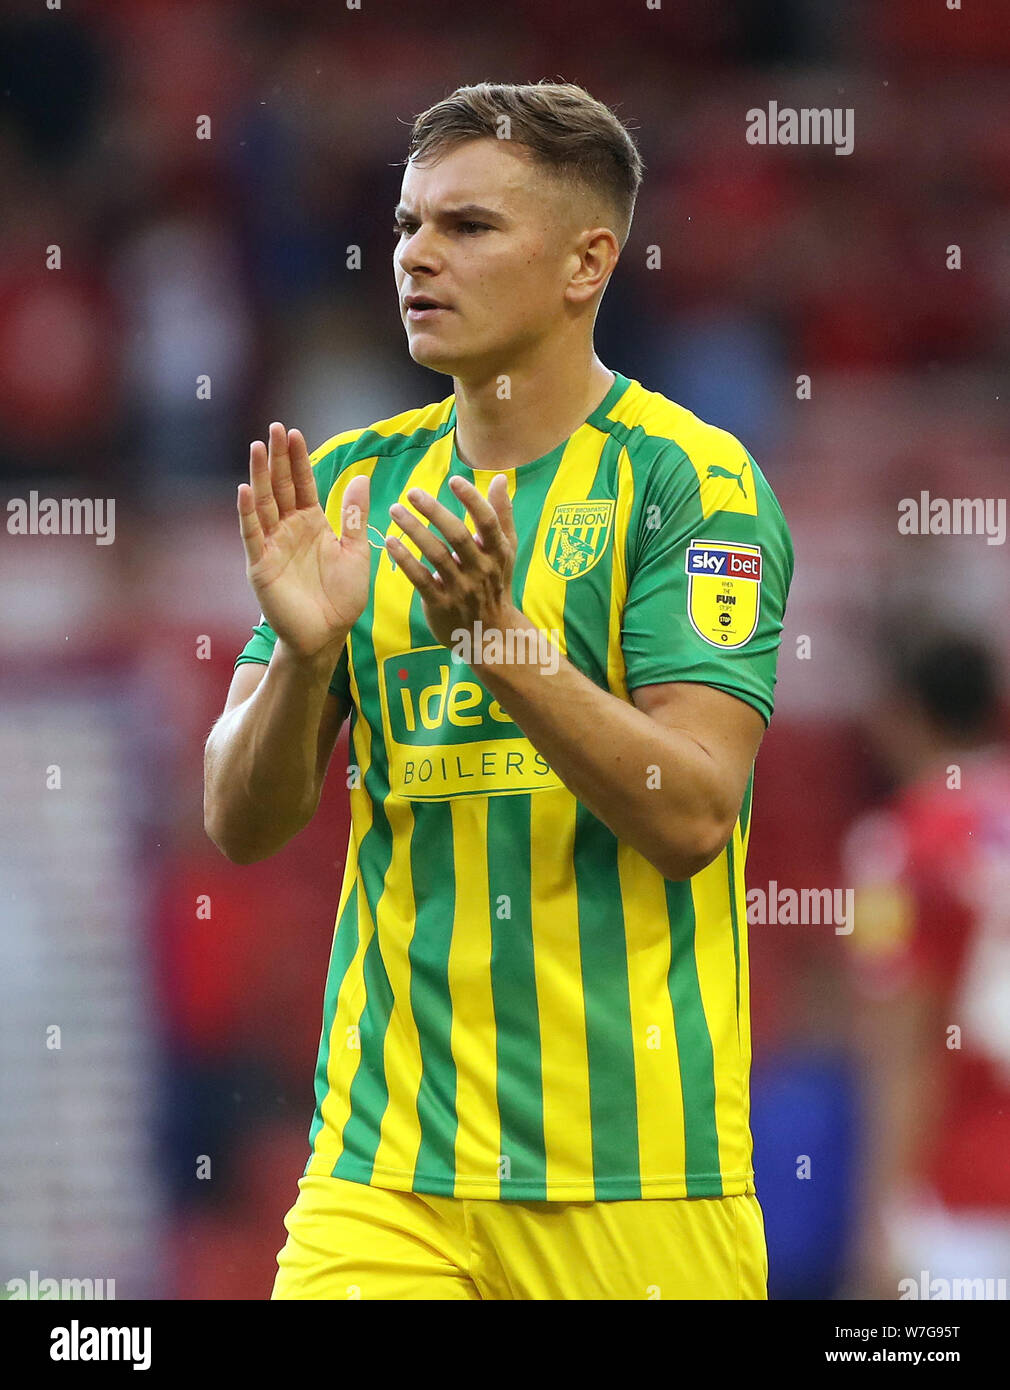 West Bromwich Albion's Conor Townsend during the Sky Bet Championship match at the City Ground, Nottingham. PRESS ASSOCIATION Photo. Picture date: Saturday August 3, 2019. Photo credit should read: Tim Goode/PA Wire. RESTRICTIONS: No use with unauthorised audio, video, data, fixture lists, club/league logos or 'live' services. Online in-match use limited to 120 images, no video emulation. No use in betting, games or single club/league/player publications. Stock Photo